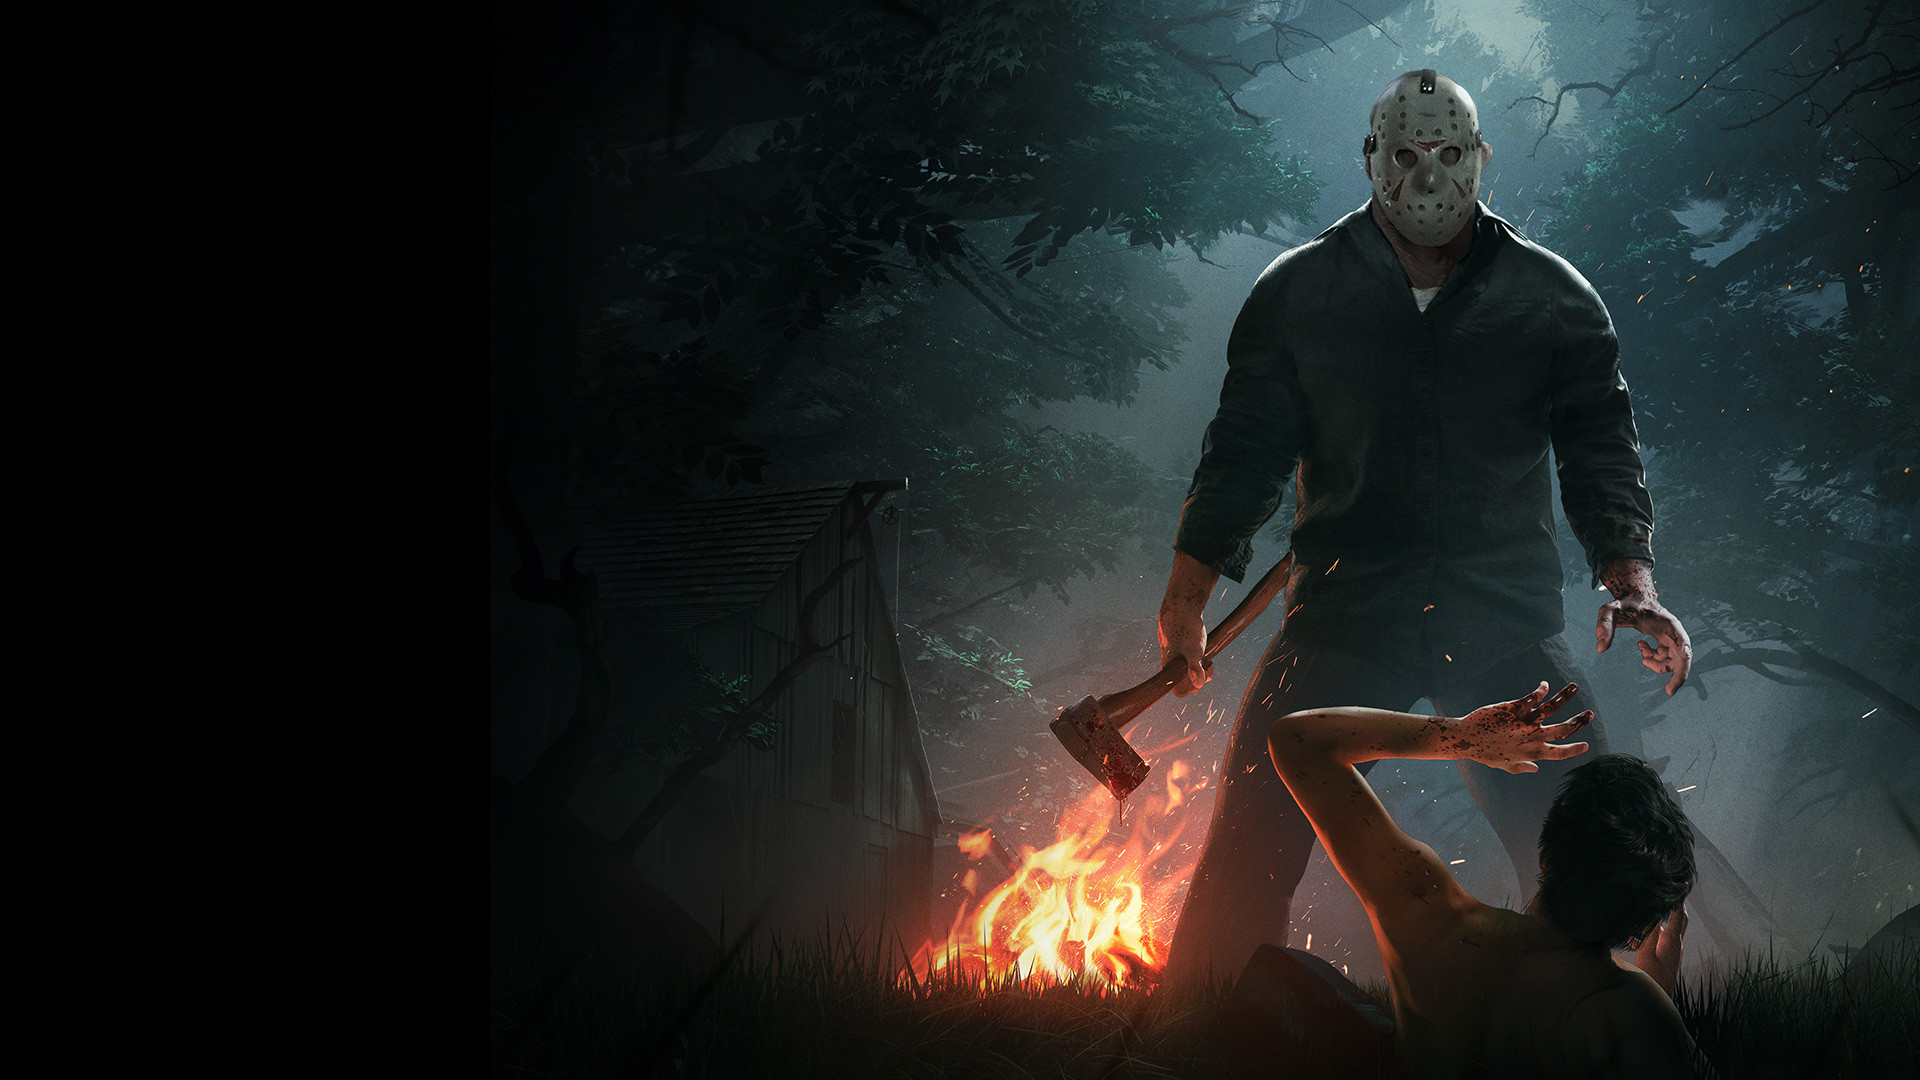 1920x1080 Don't scream: The new 'Friday the 13th' game is out today - Daily Tech Whip  | Daily Tech Whip